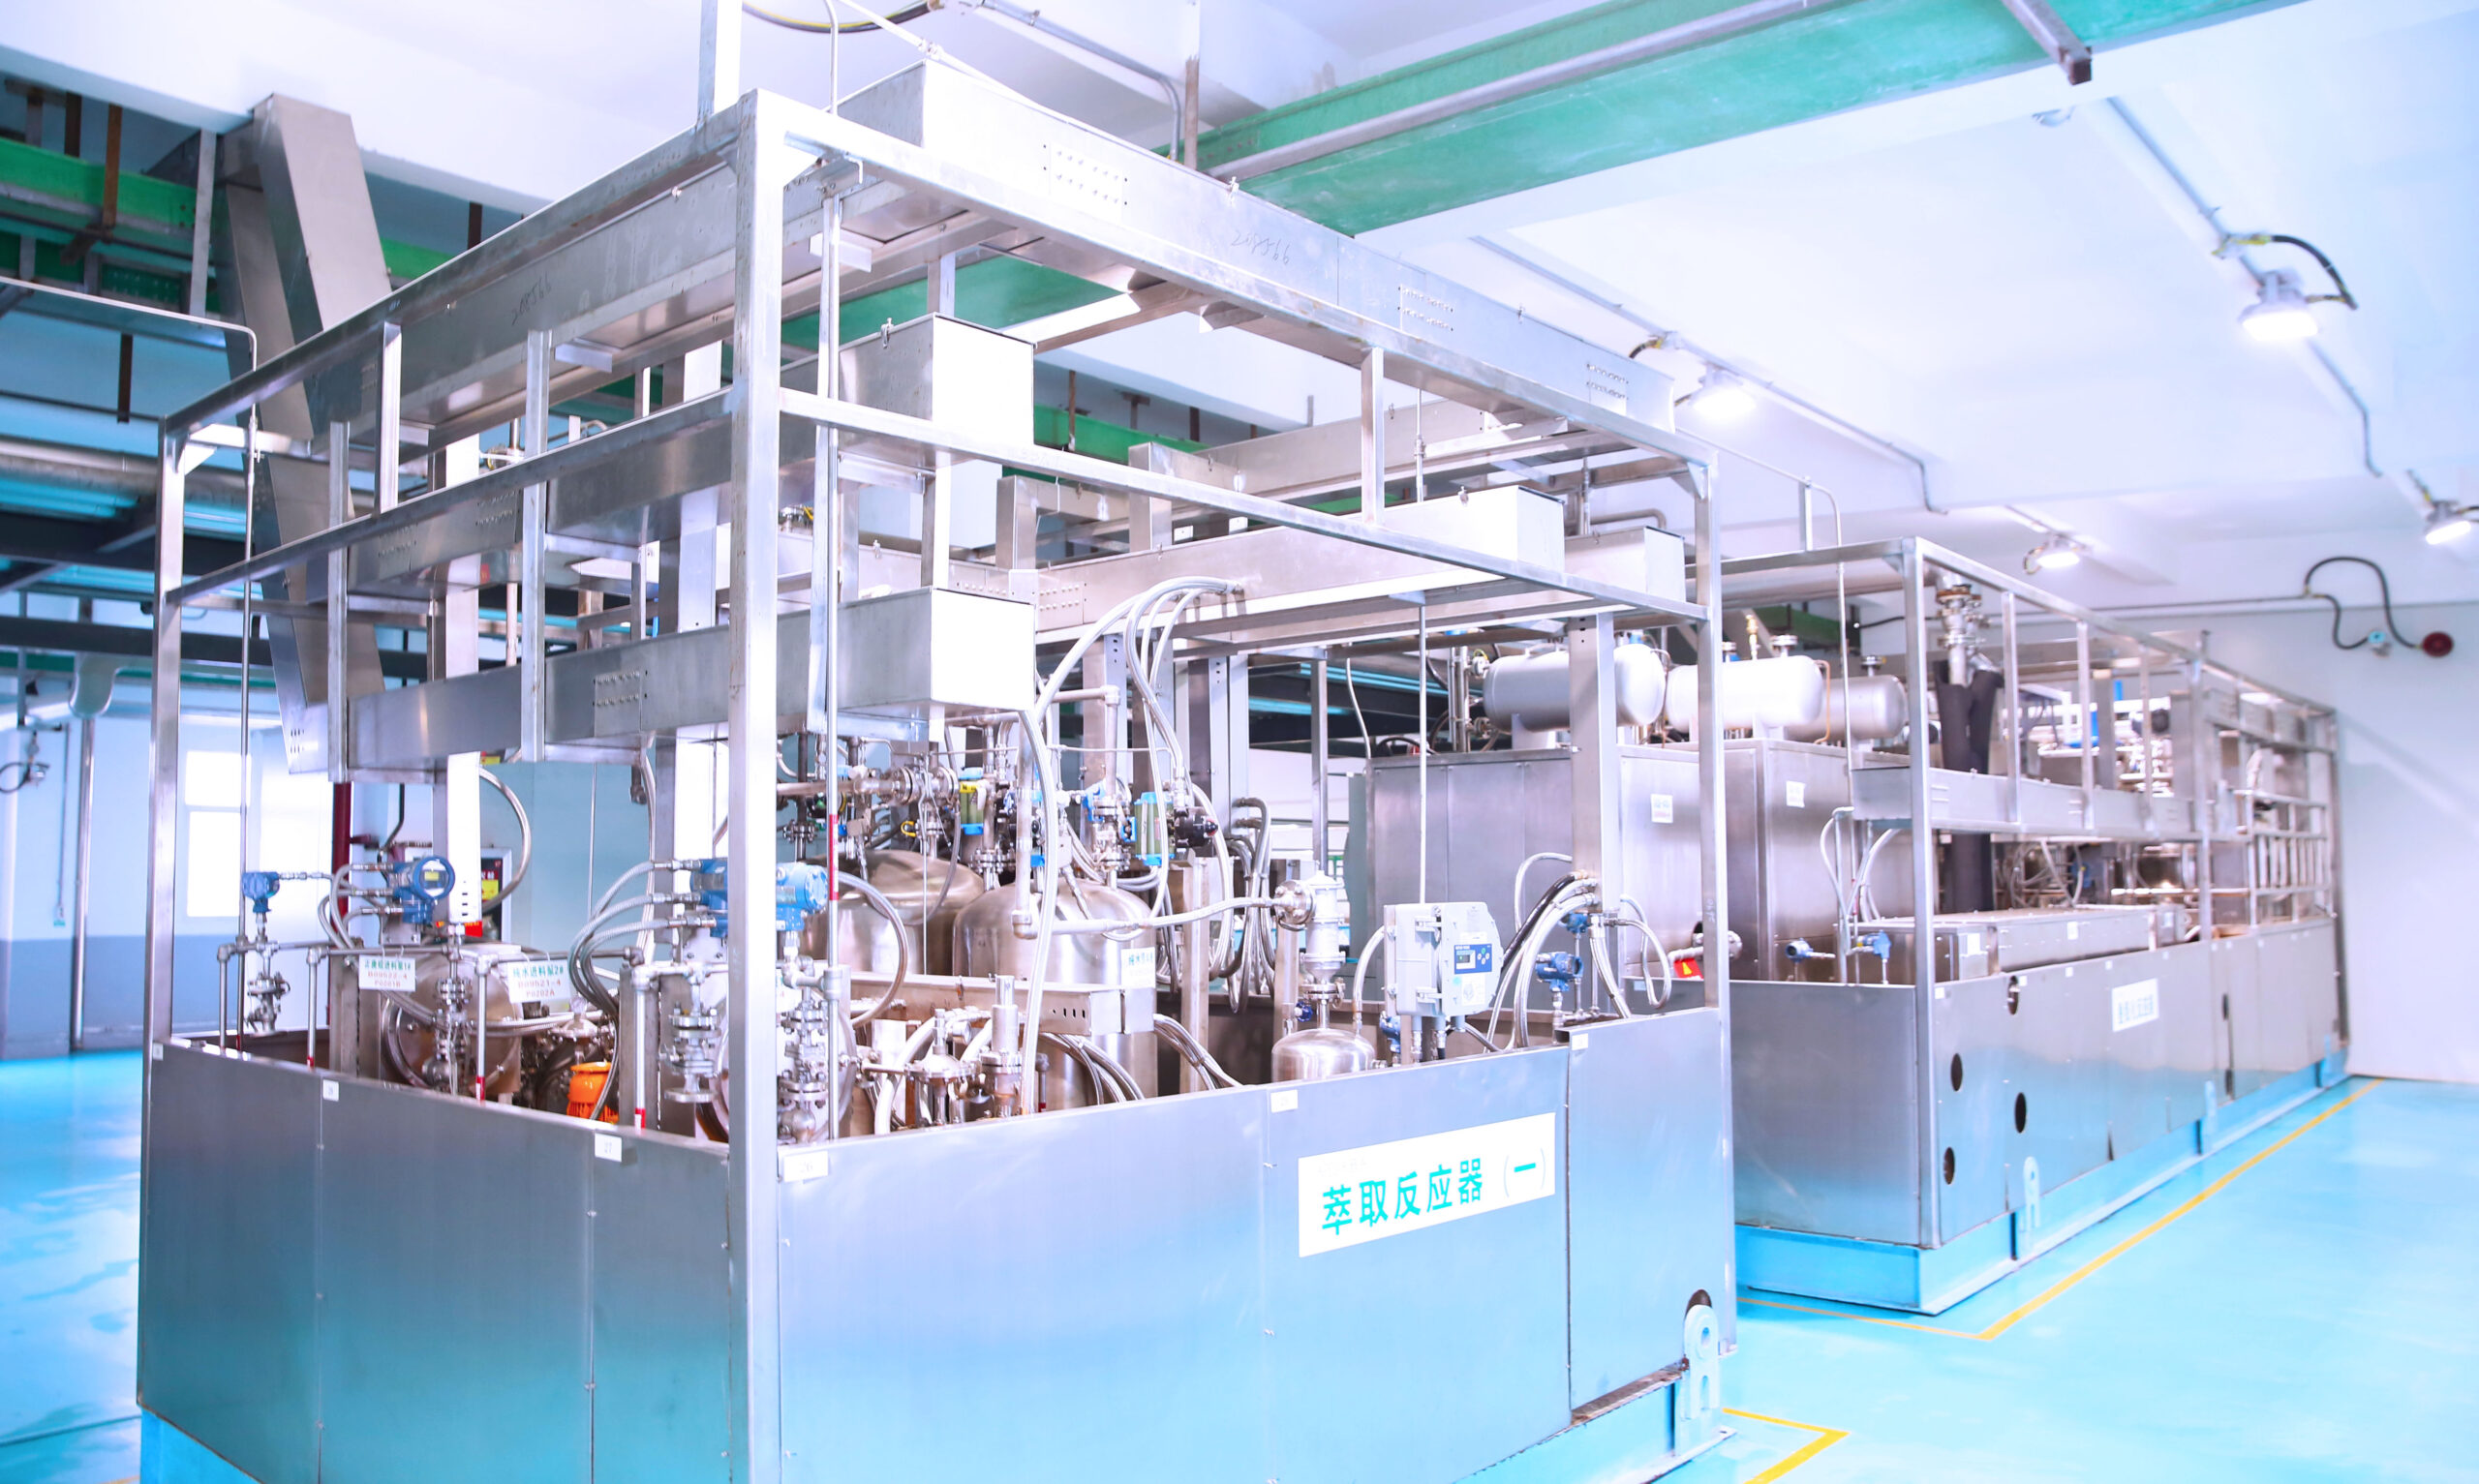 Apeloa CDMO flow chemistry experts can develop and manufacture API with high-risk processes like highly exothermic, explosive, light activated or complex synthesis including azidation, hydrogenation, nitration, diazonium, ozonation, and organolithium reactions.